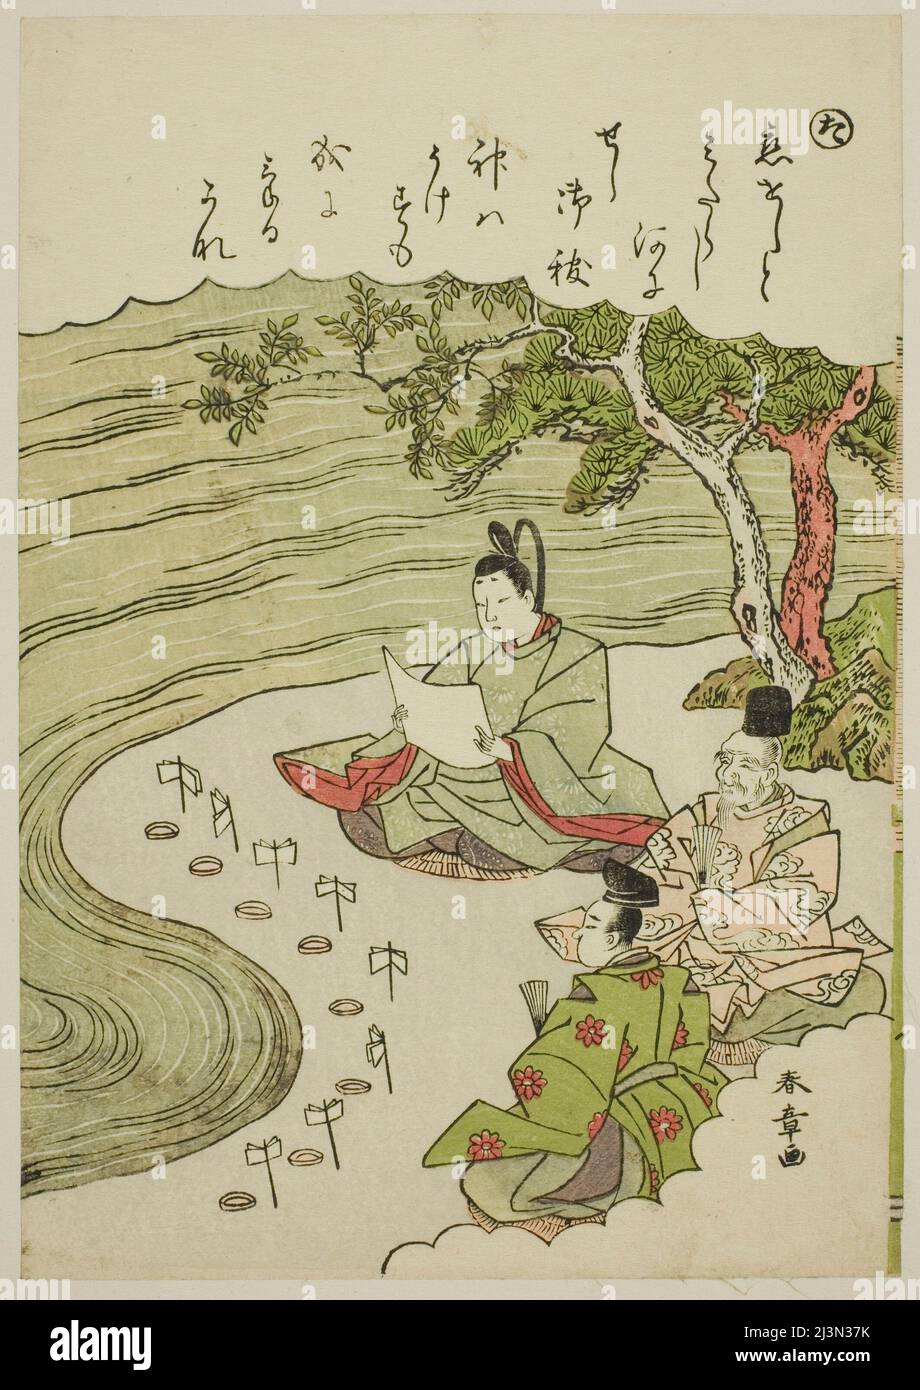 Ta: Purification Ceremony to Remove the Pains of Love, from the series &quot;Tales of Ise in Fashionable Brocade Pictures (Furyu nishiki-e Ise monogatari)&quot;, Japan, c. 1772/73. Stock Photo